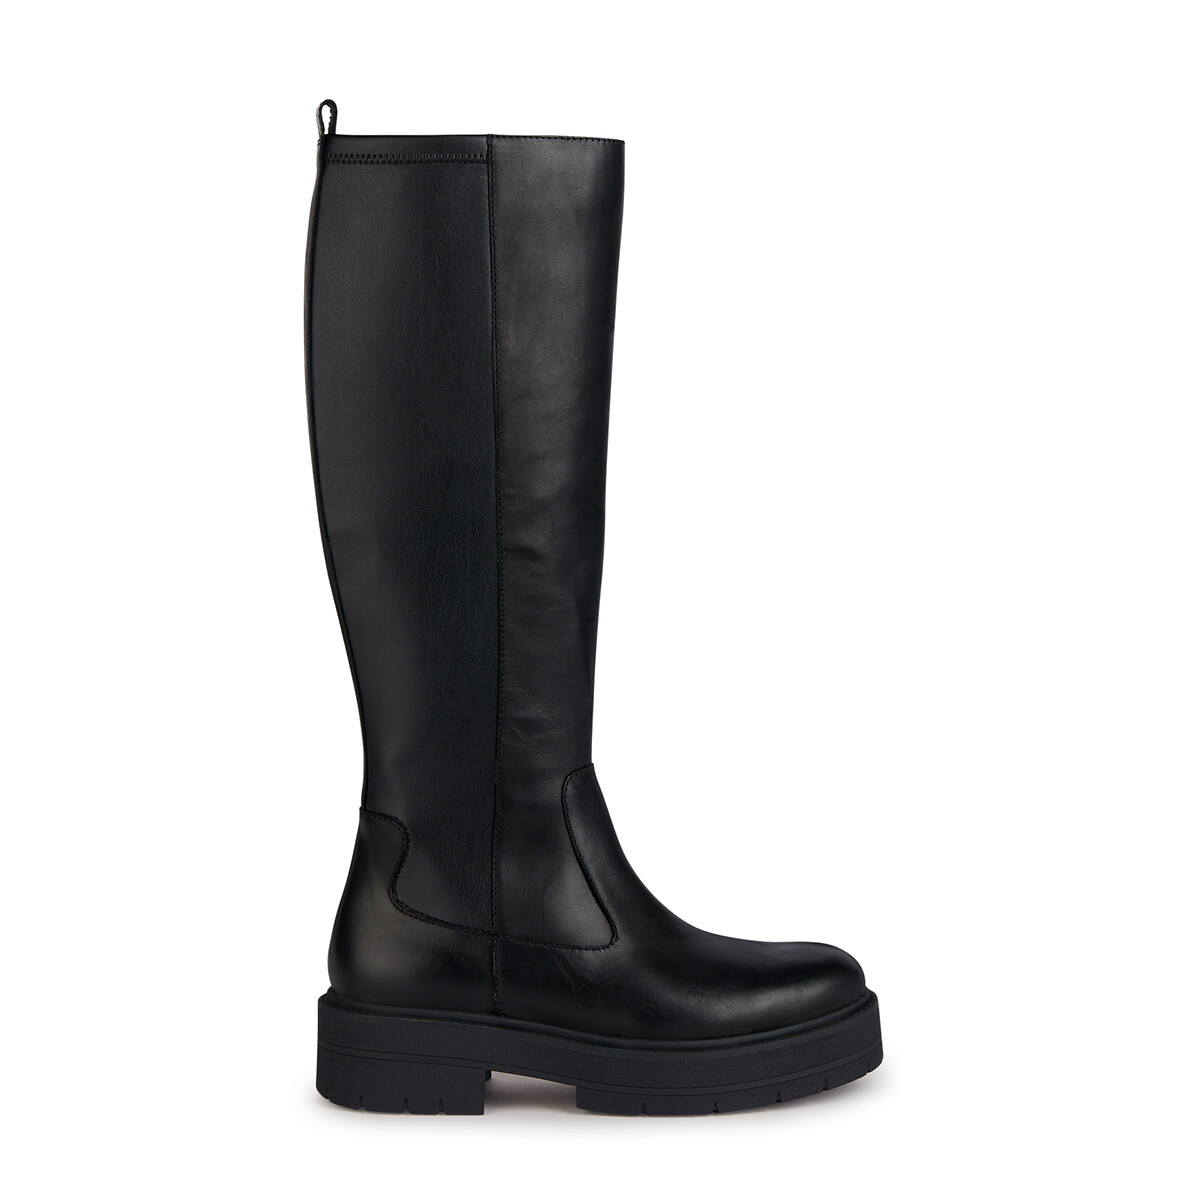 Spherica Breathable Knee-High Boots with Flat Heel in Leather